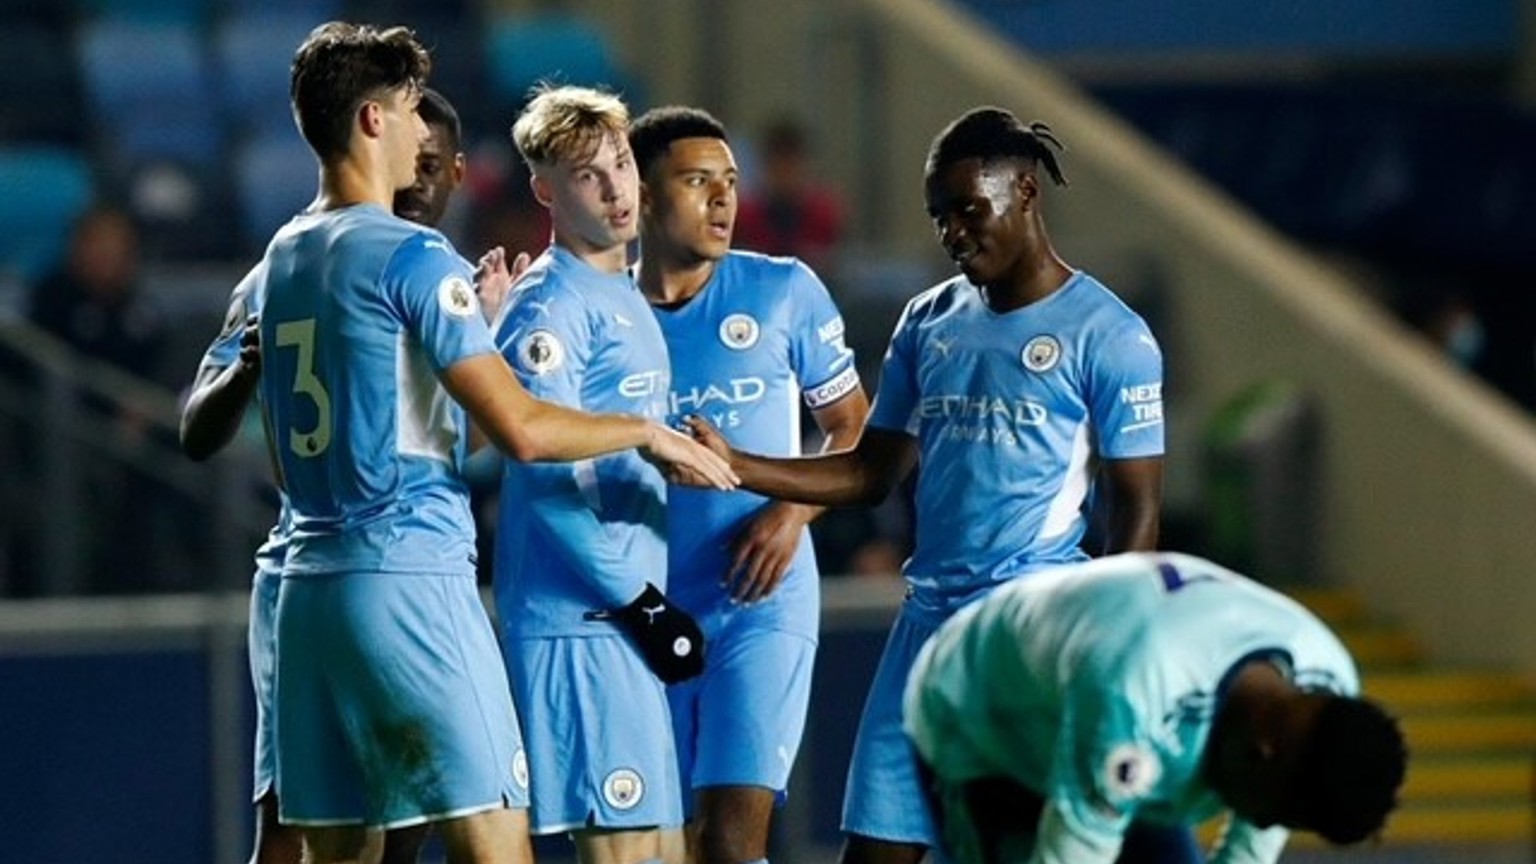 Palmer hat-trick inspires EDS to dominant Leicester win